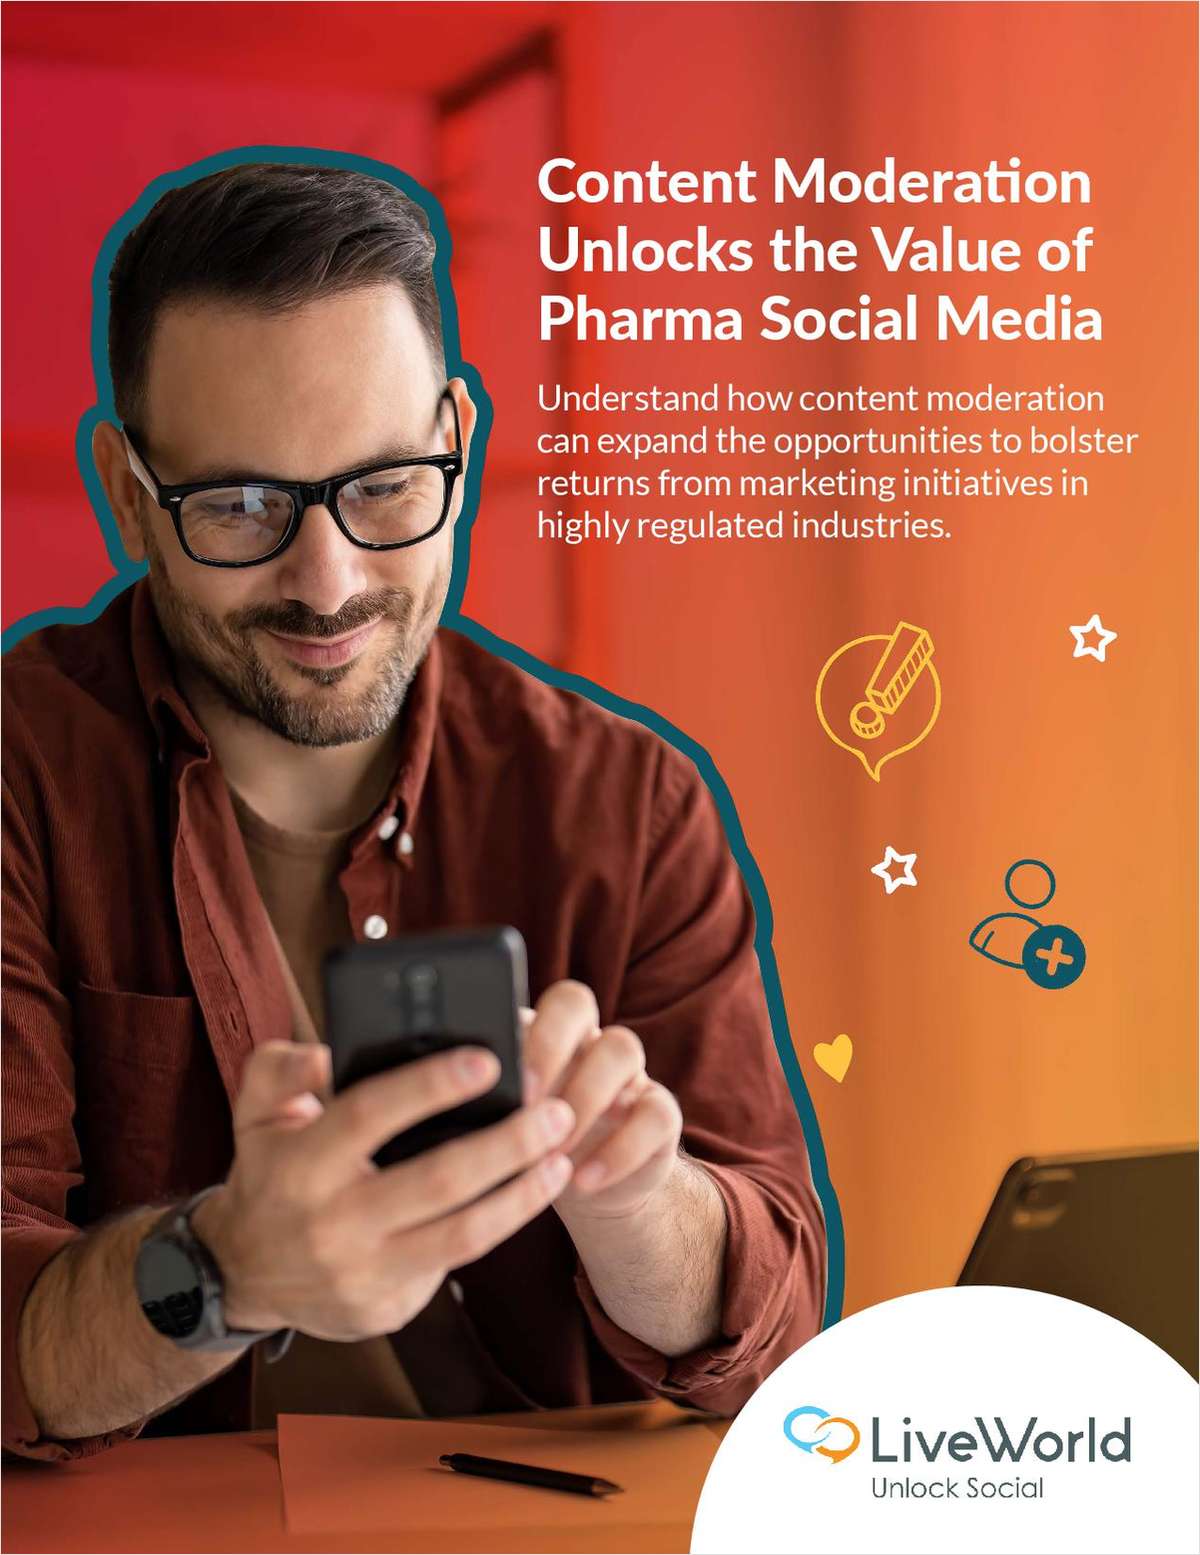 Beyond Brand Protection: Unlock the Value of Content Moderation